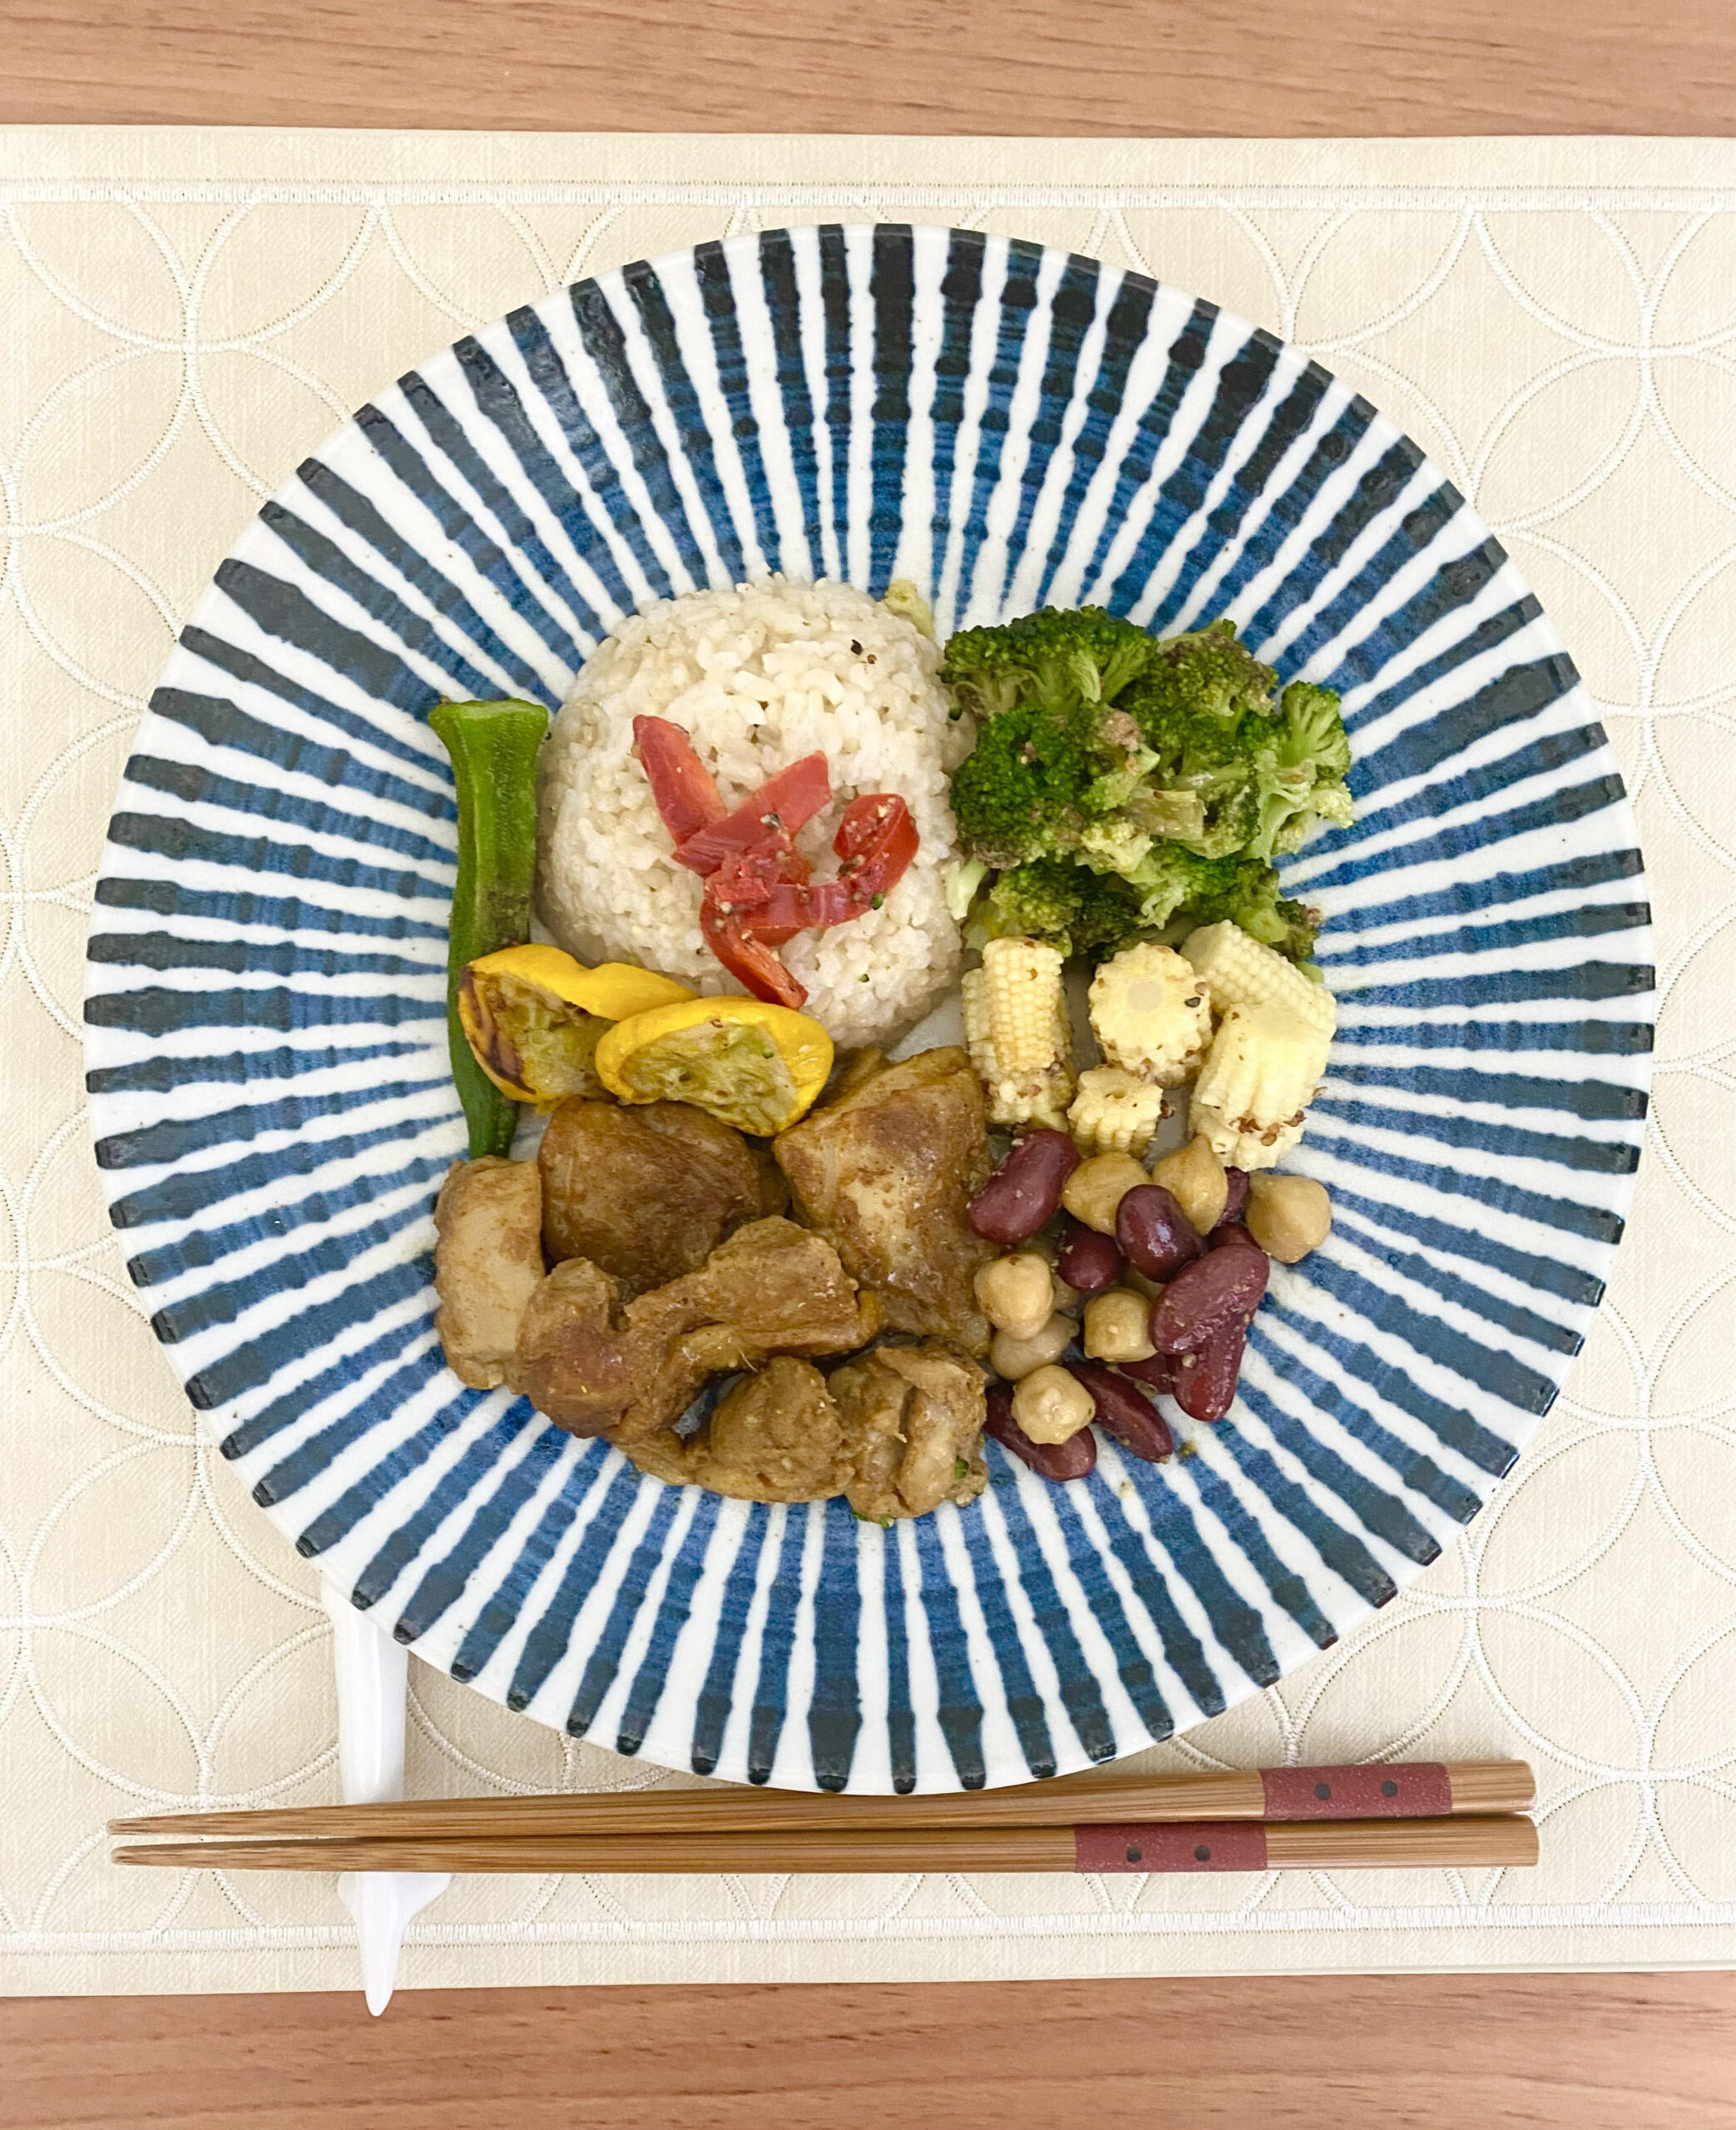 FIT FOOD HOME_低糖質VEGE＋_タンドリーチキン+玄米_盛り付け後